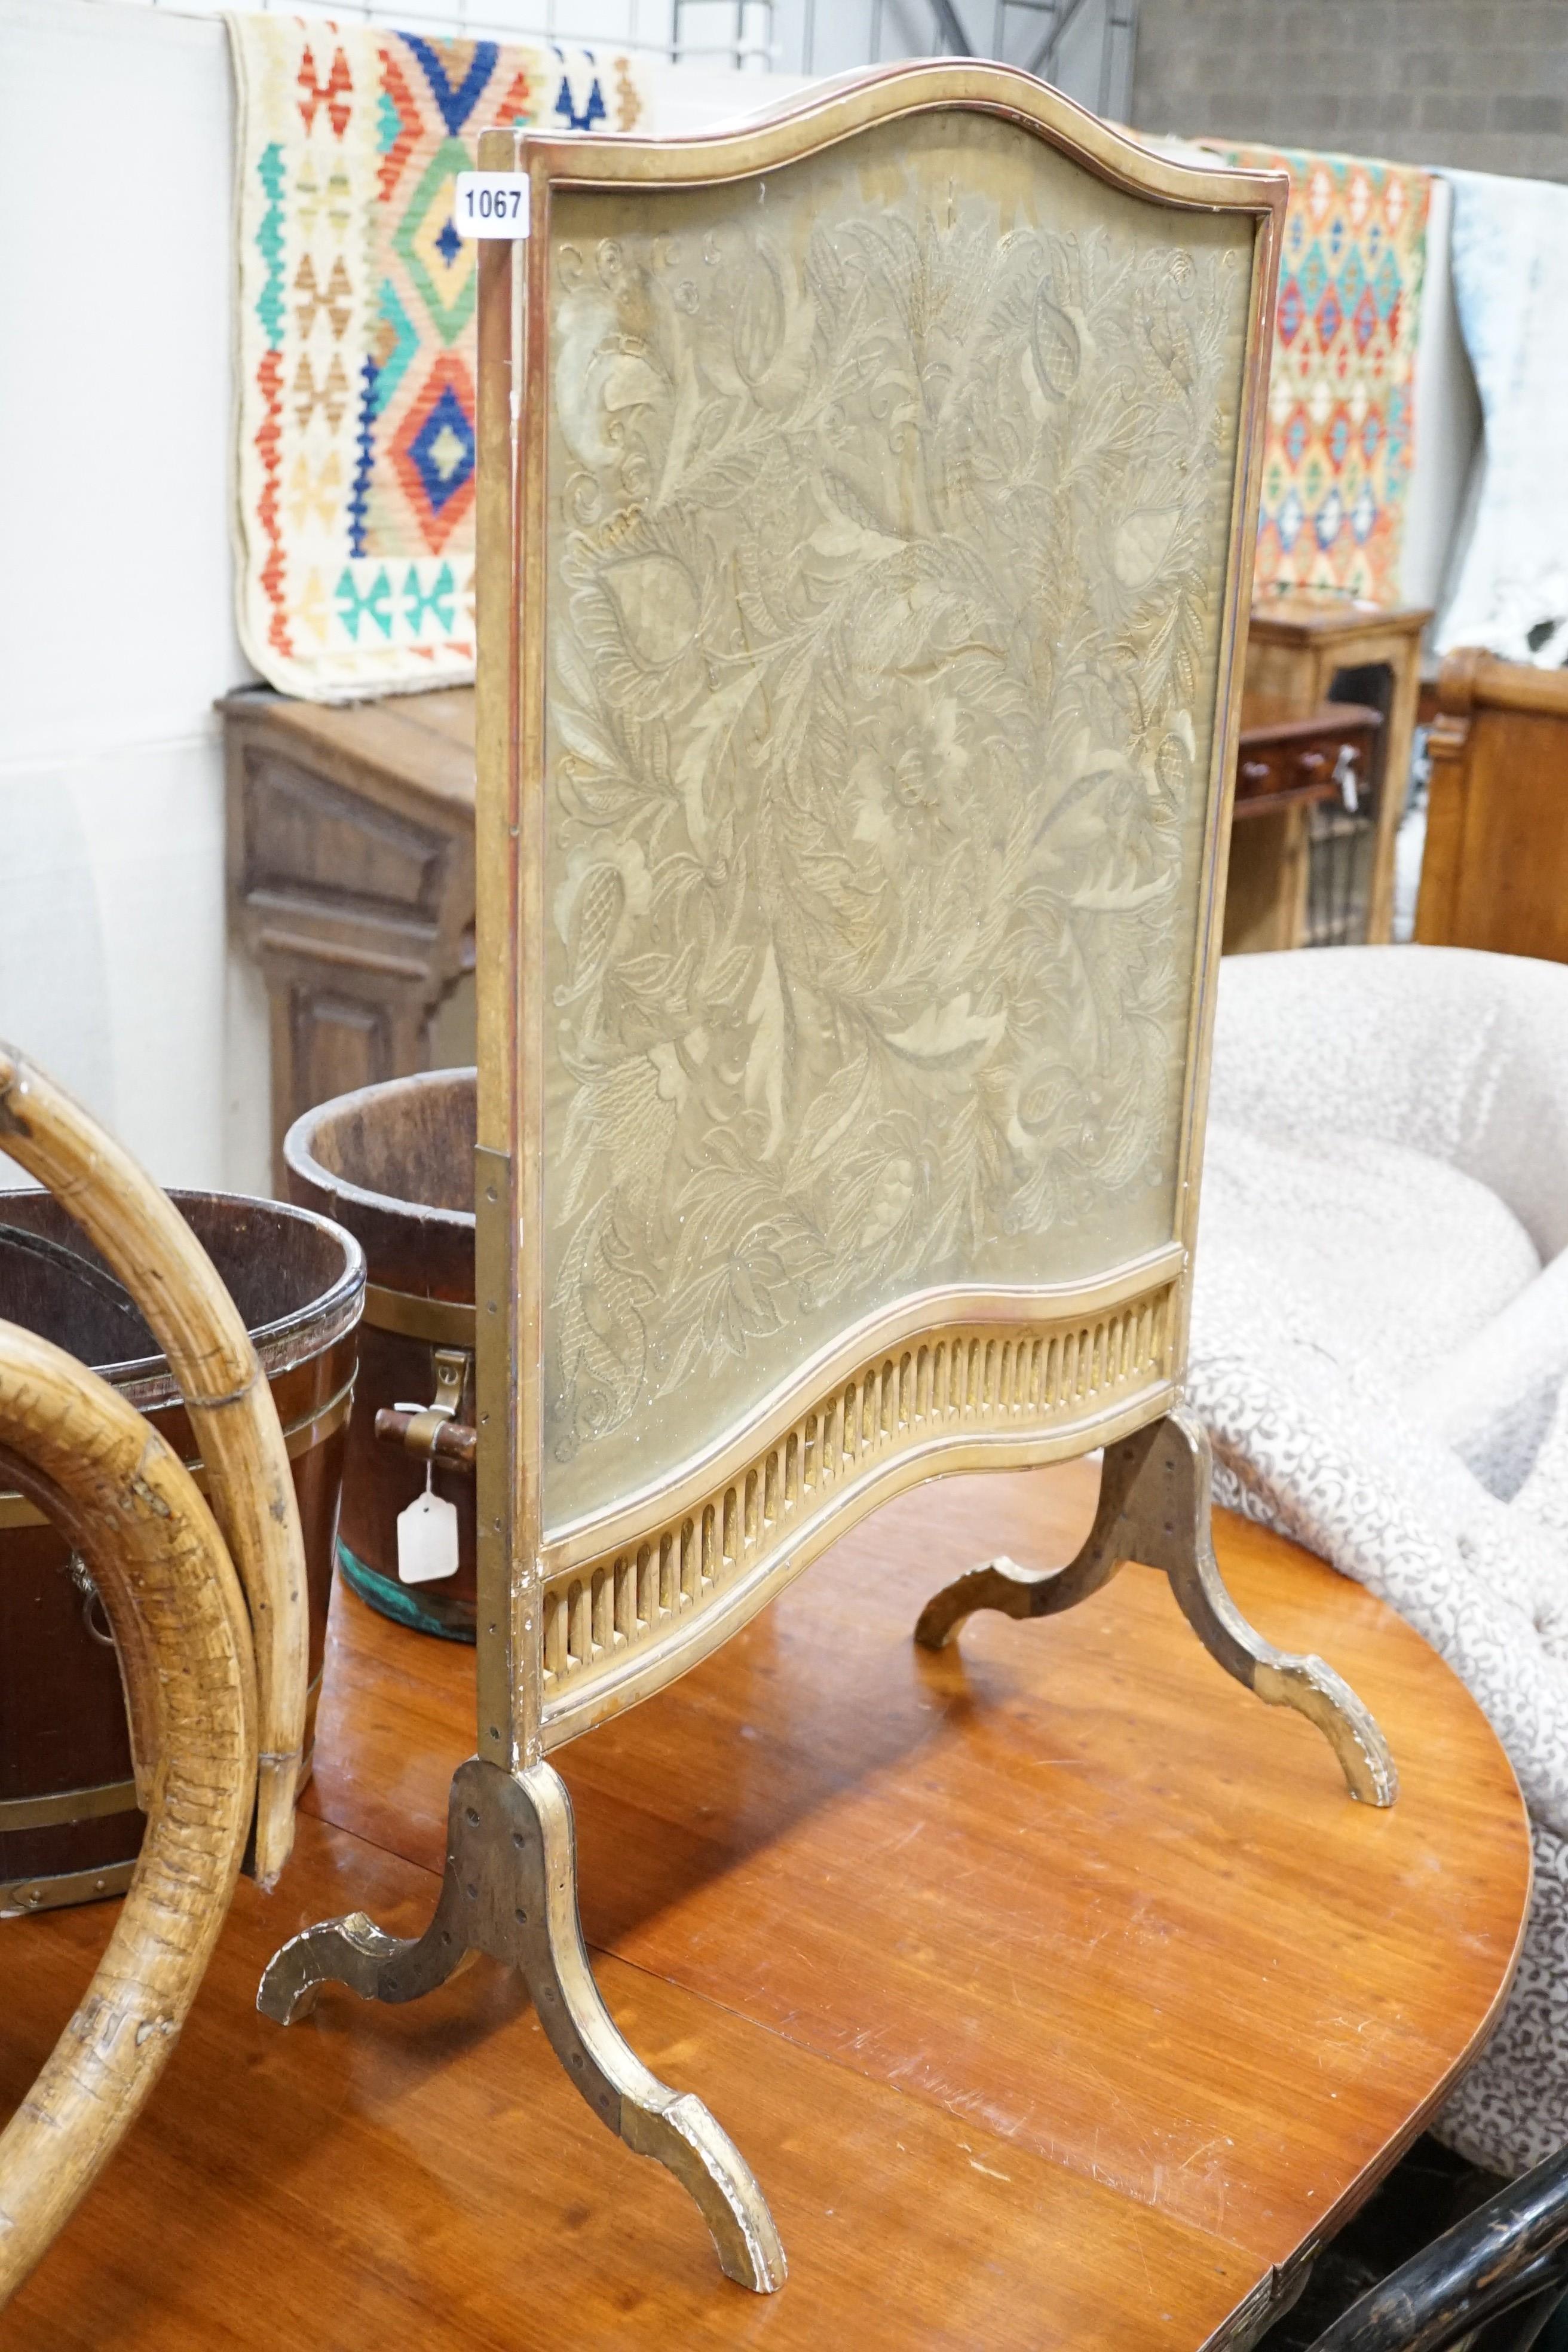 A carved gilt wood fire screen with internal needlework panel, width 56cm, height 92cm - Image 3 of 3